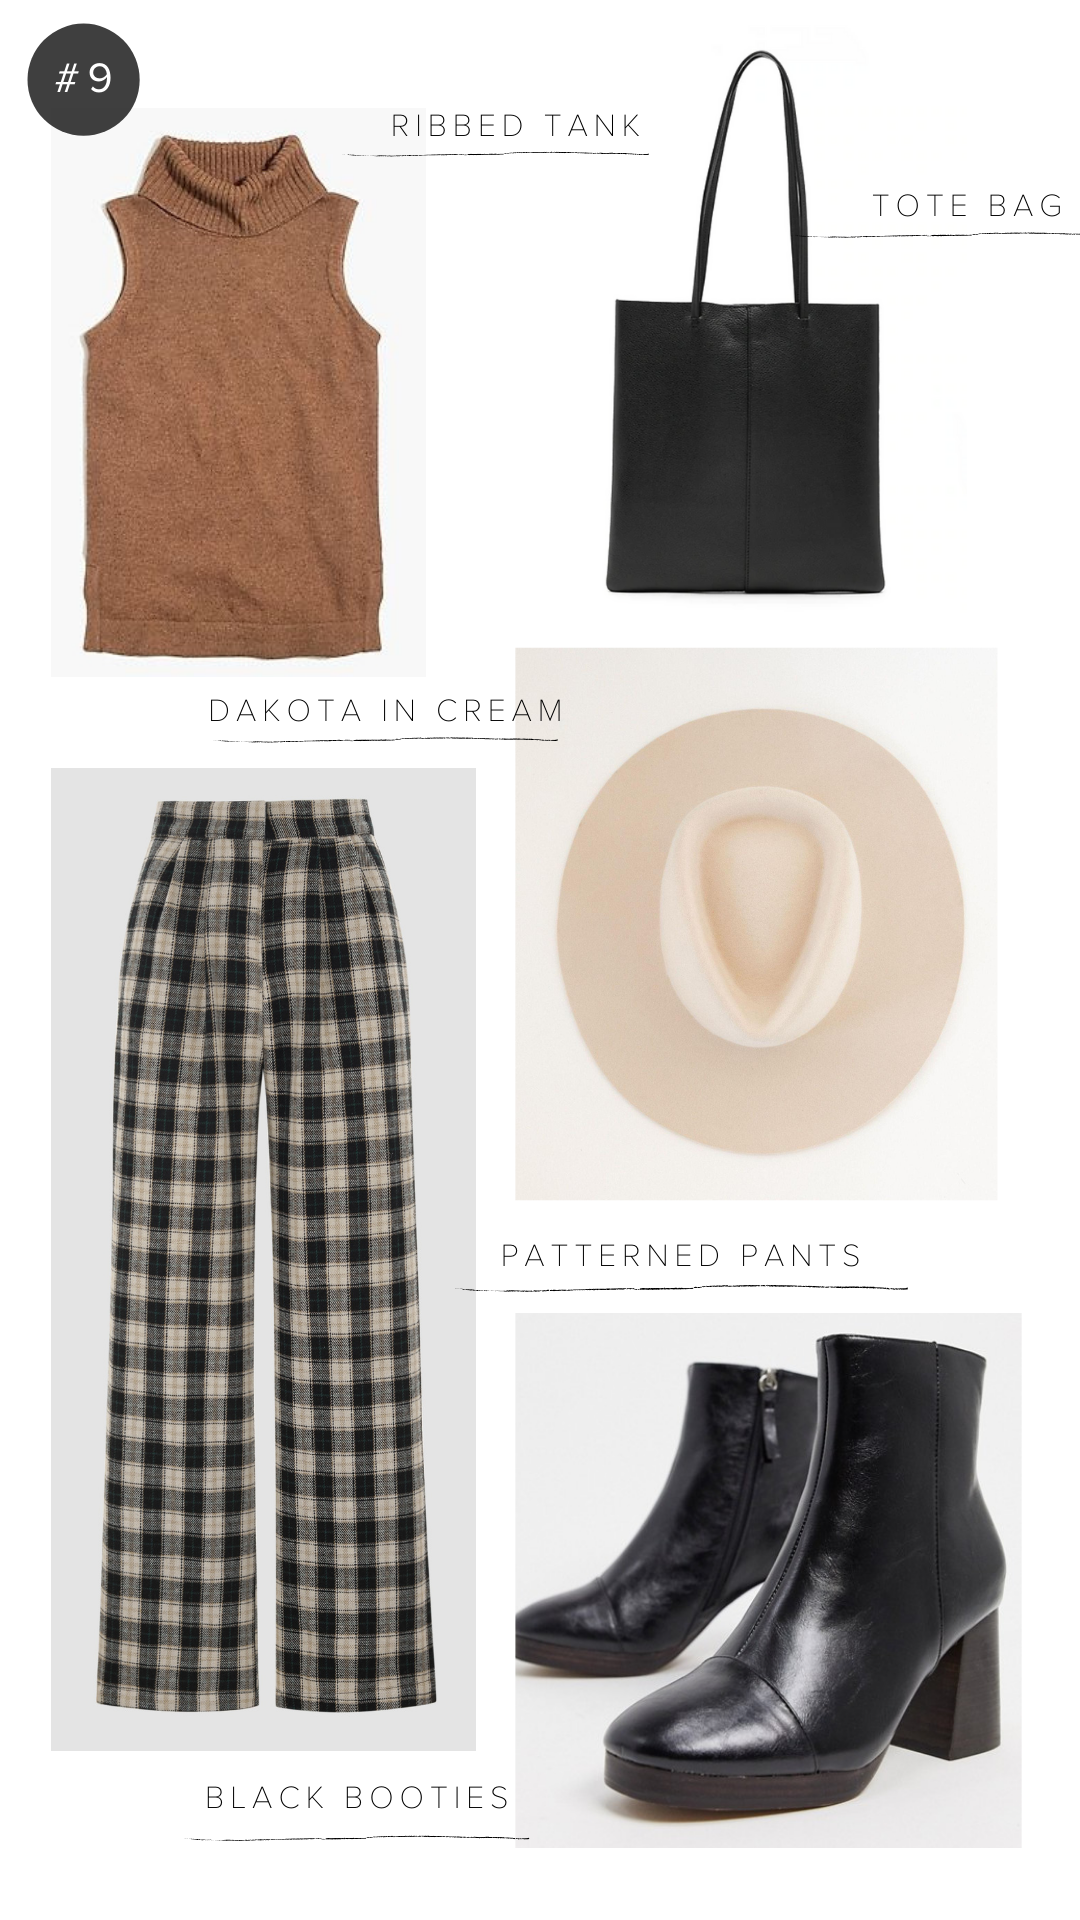 10 COFFEE DATE OUTFIT IDEAS (with images) - GIGI PIP